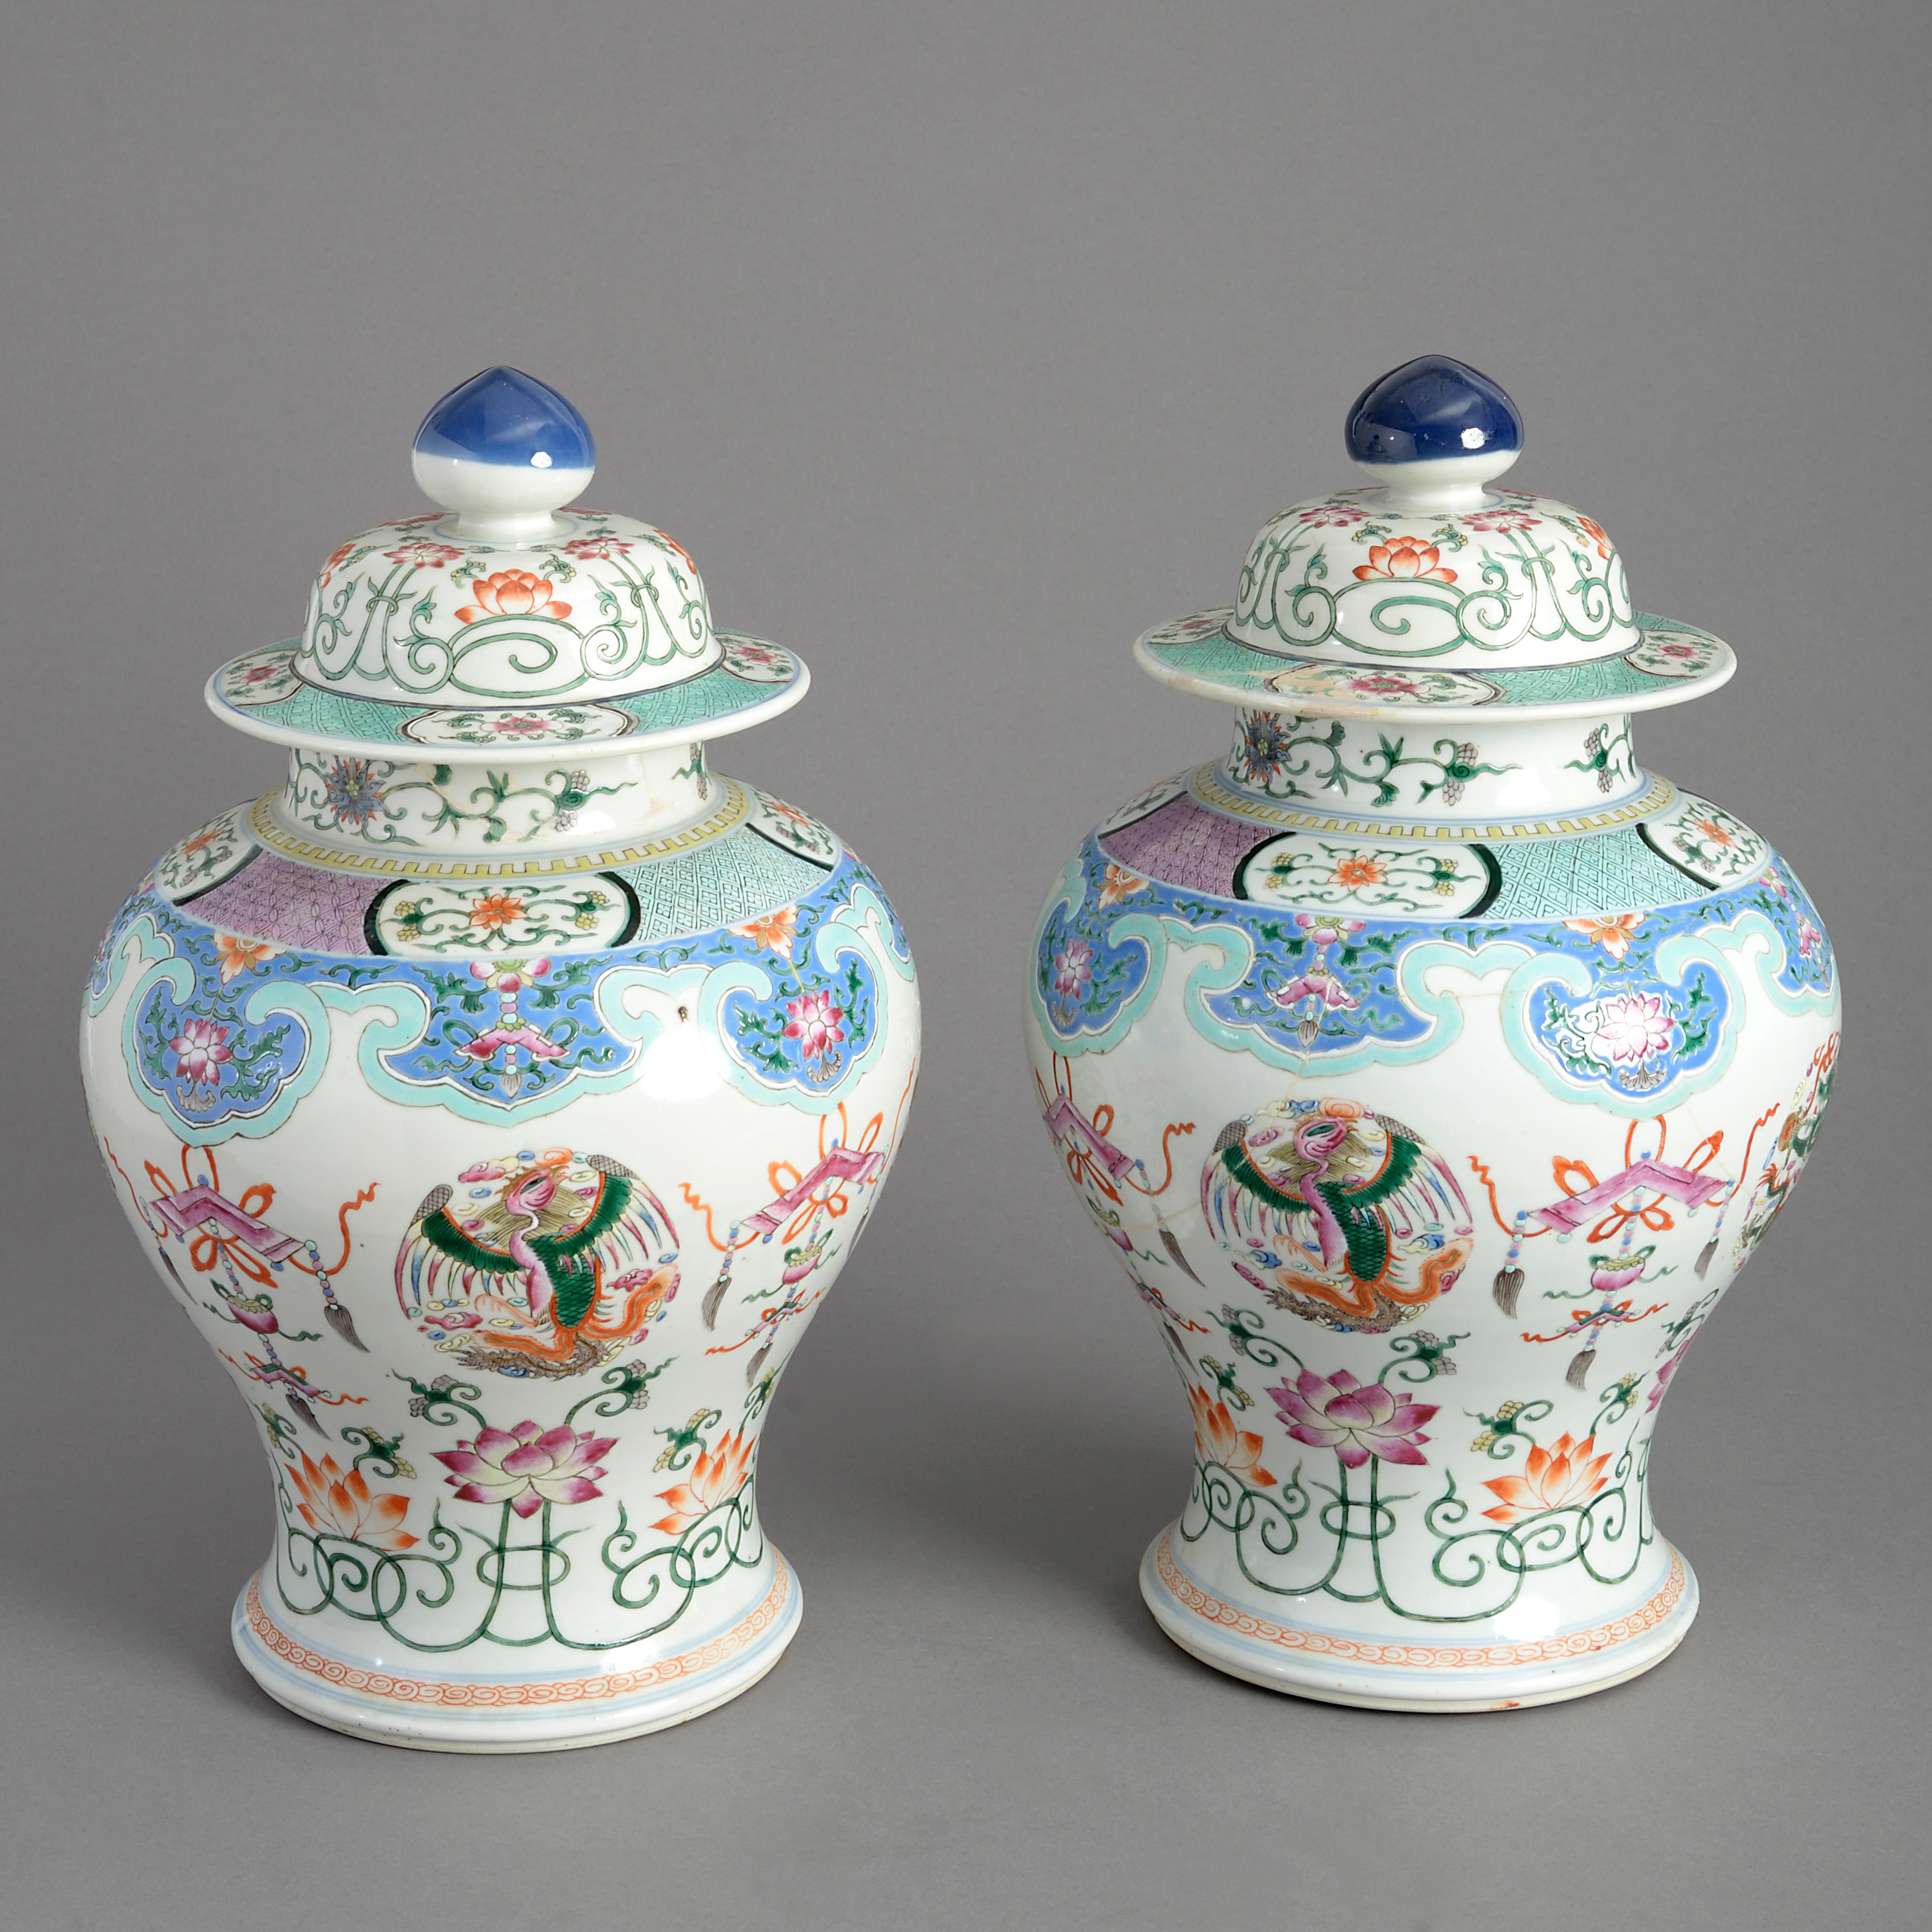 A fine 19th century pair of porcelain baluster form vases with covers, decorated throughout in famille rose glazes upon a white ground.

Both vases restored

Late Qing Dynasty (1644-1912).

   